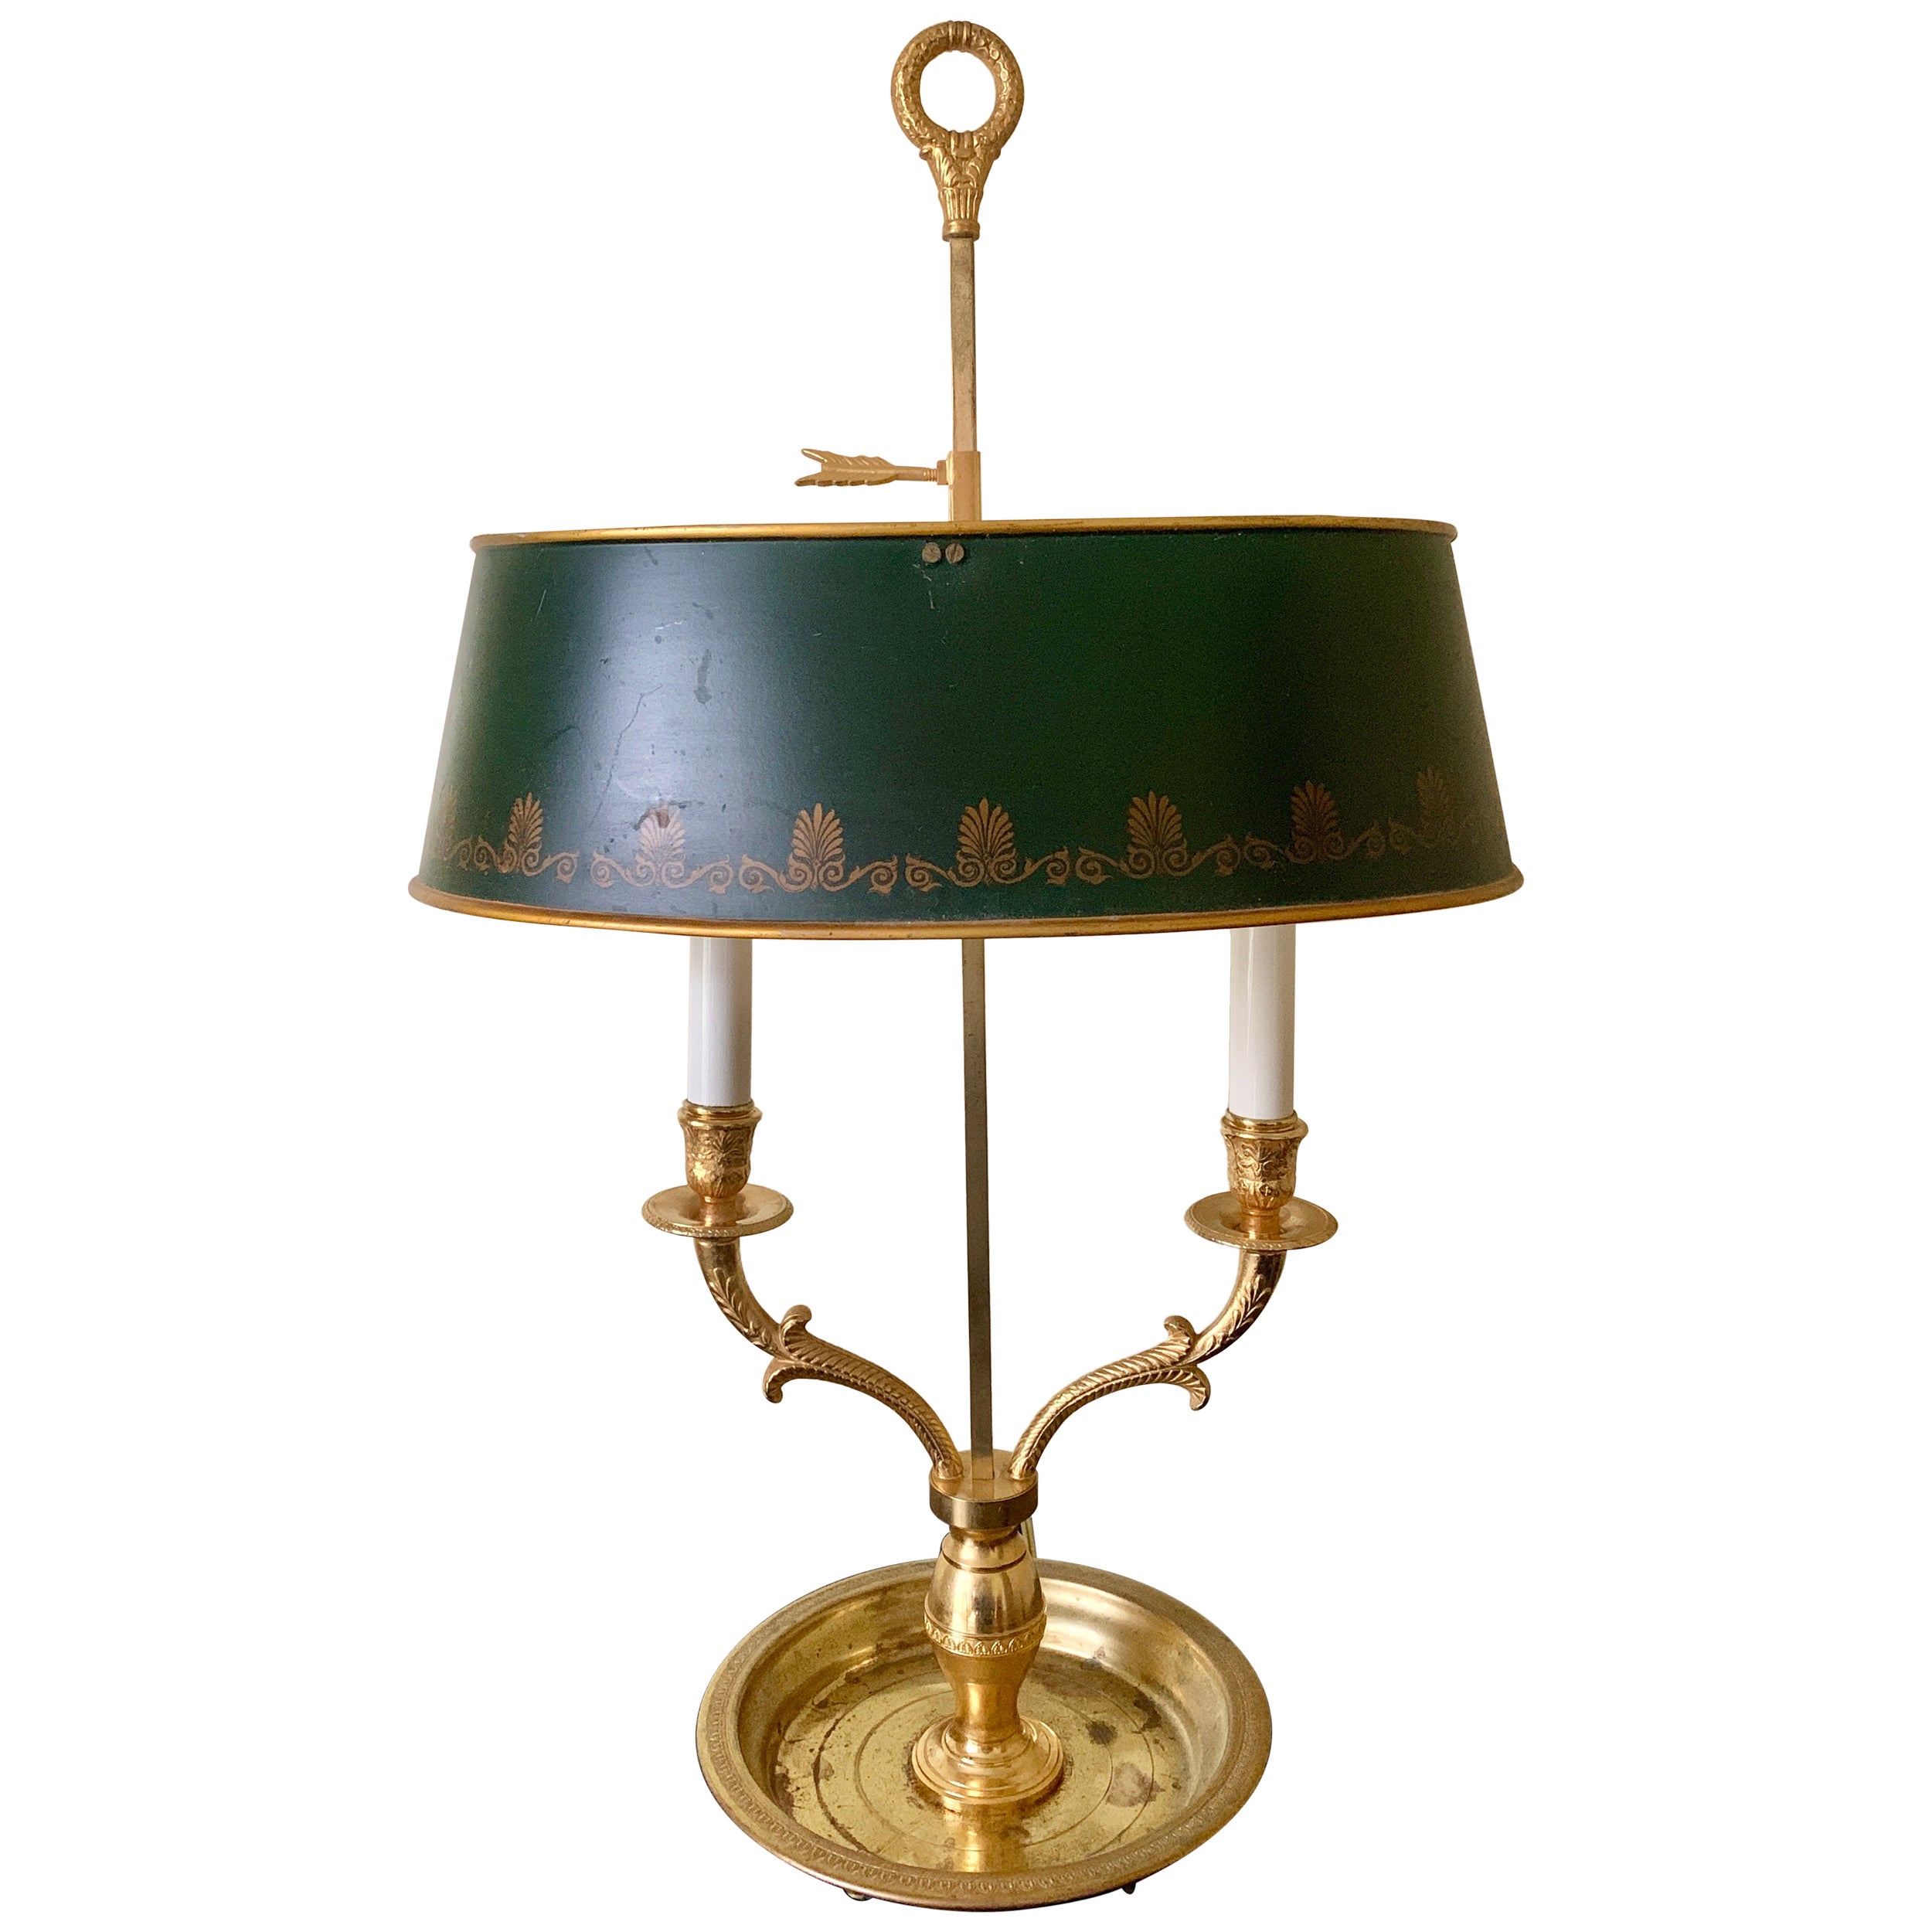 French Provincial Brass Bouillotte Lamp With Stenciled Green Tole Shade For Sale